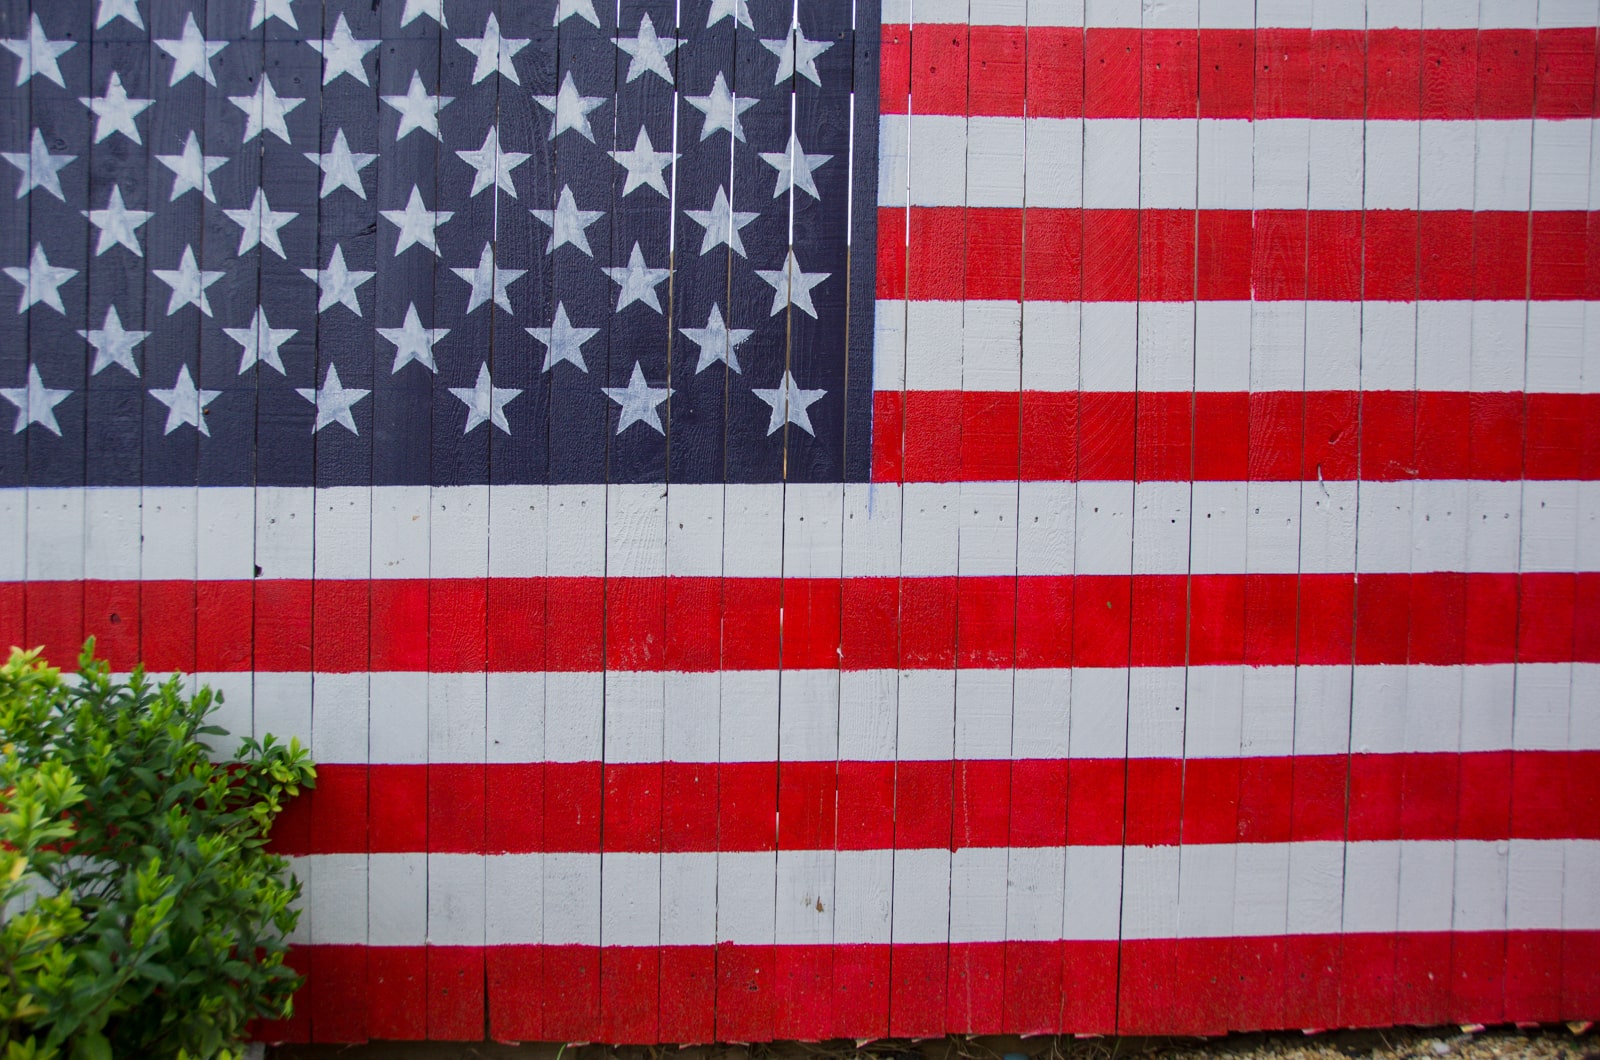 A fence with the American Flag painted on it